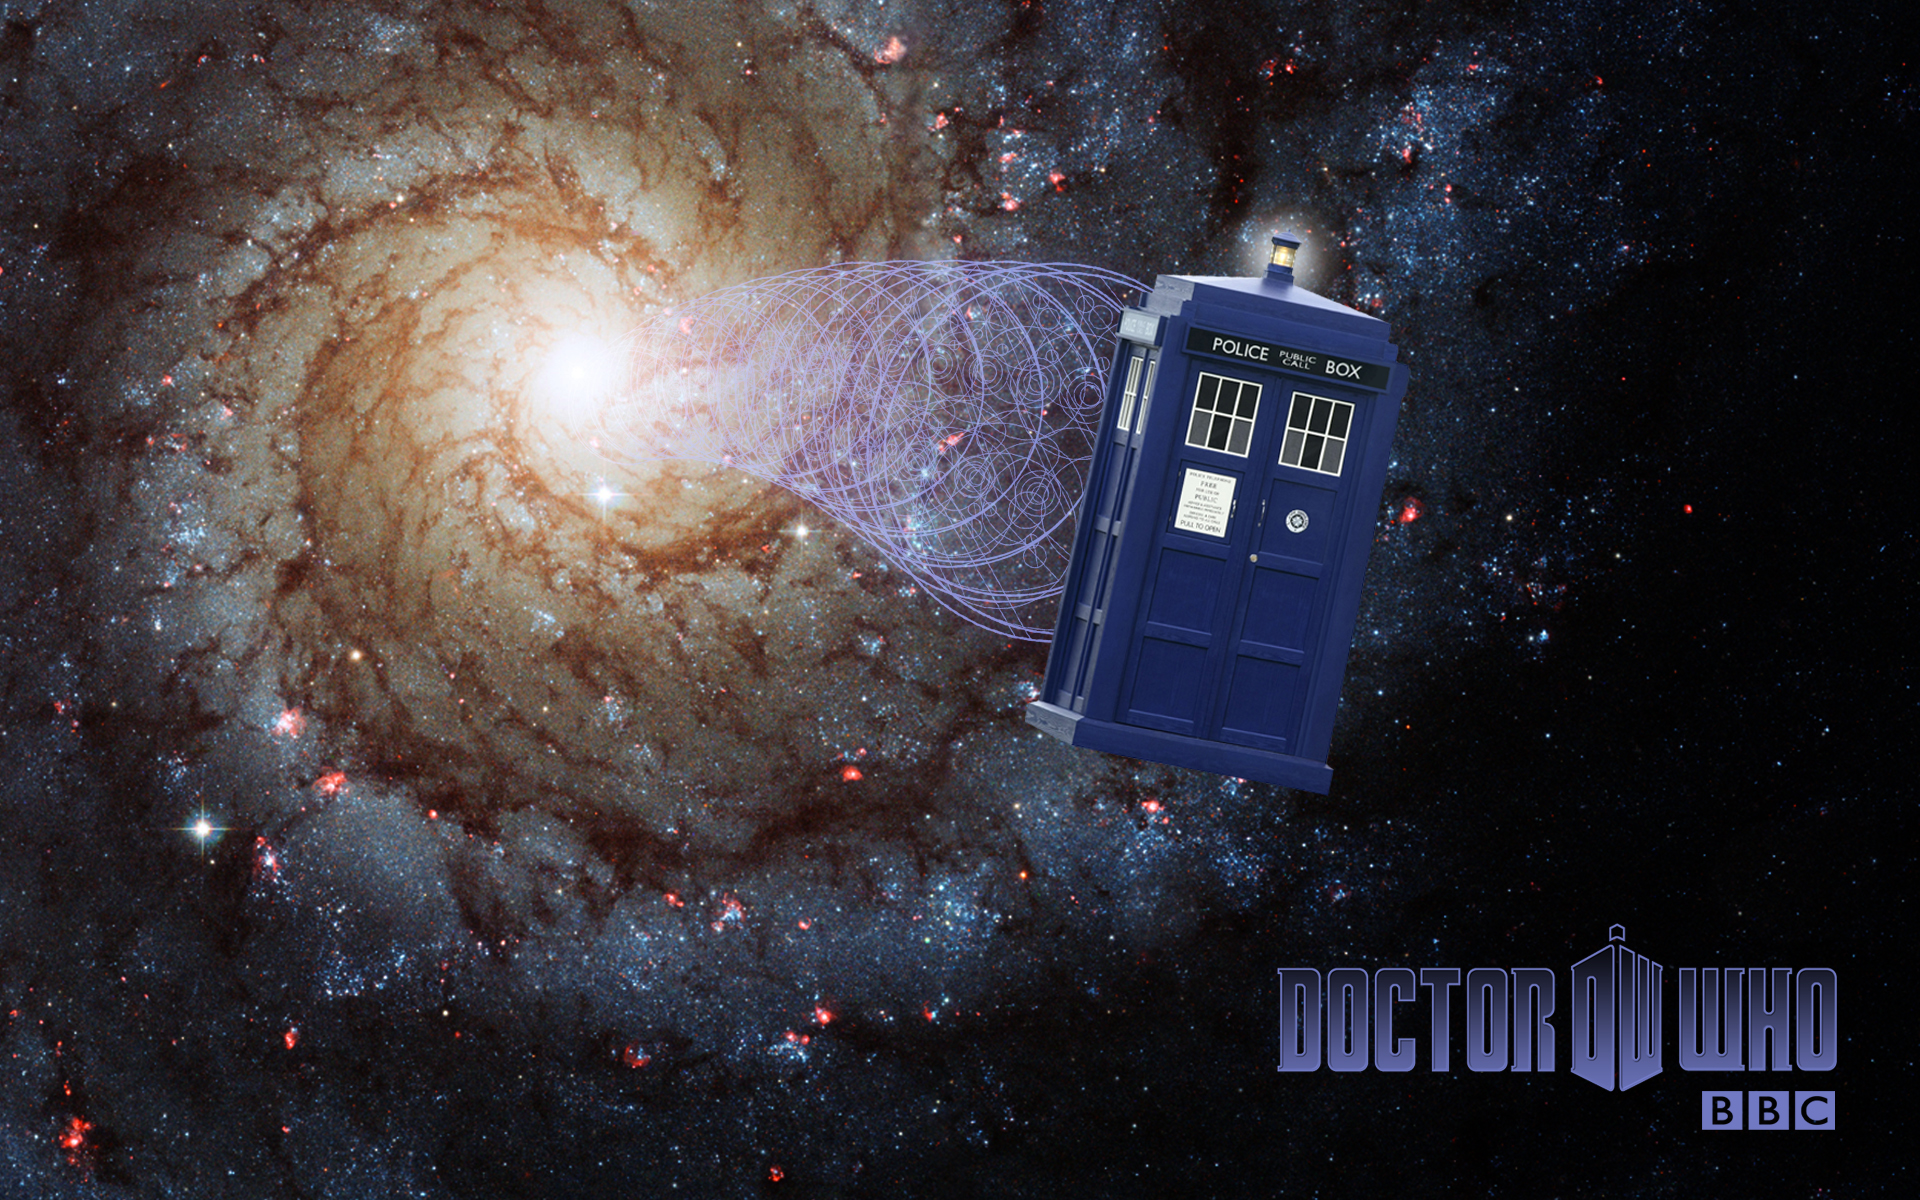 Doctor Who Wallpaper Tardis Pictures In High Definition Or Widescreen